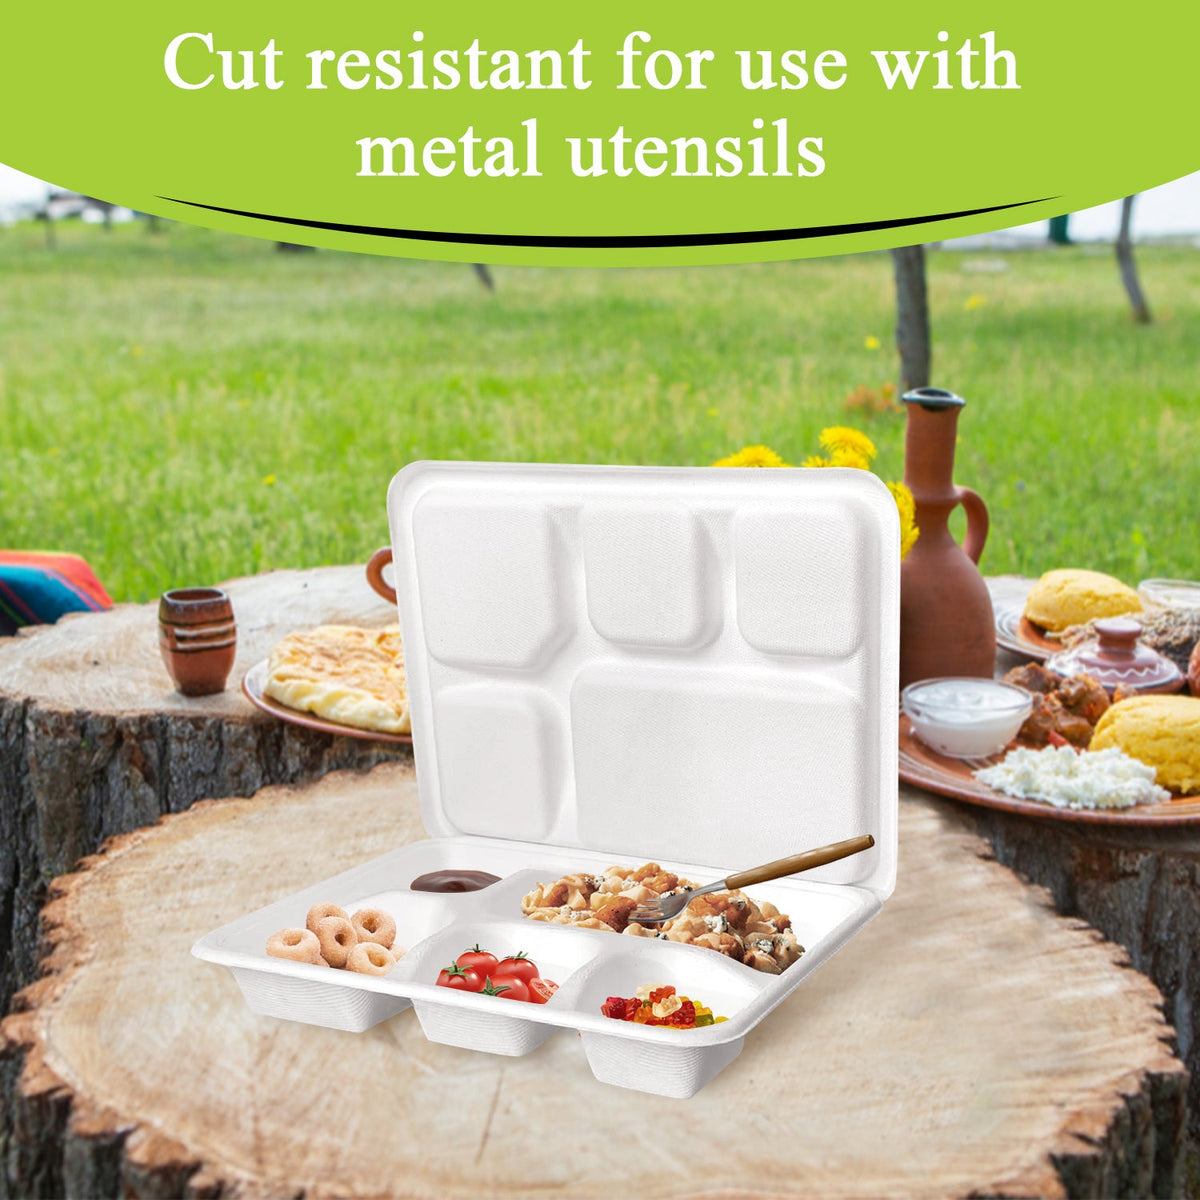 5 Compartment Meal Tray with Lid, 100?o Friendly, Biodegradable &  Disposable Compartment Meal Tray with Smart Lock